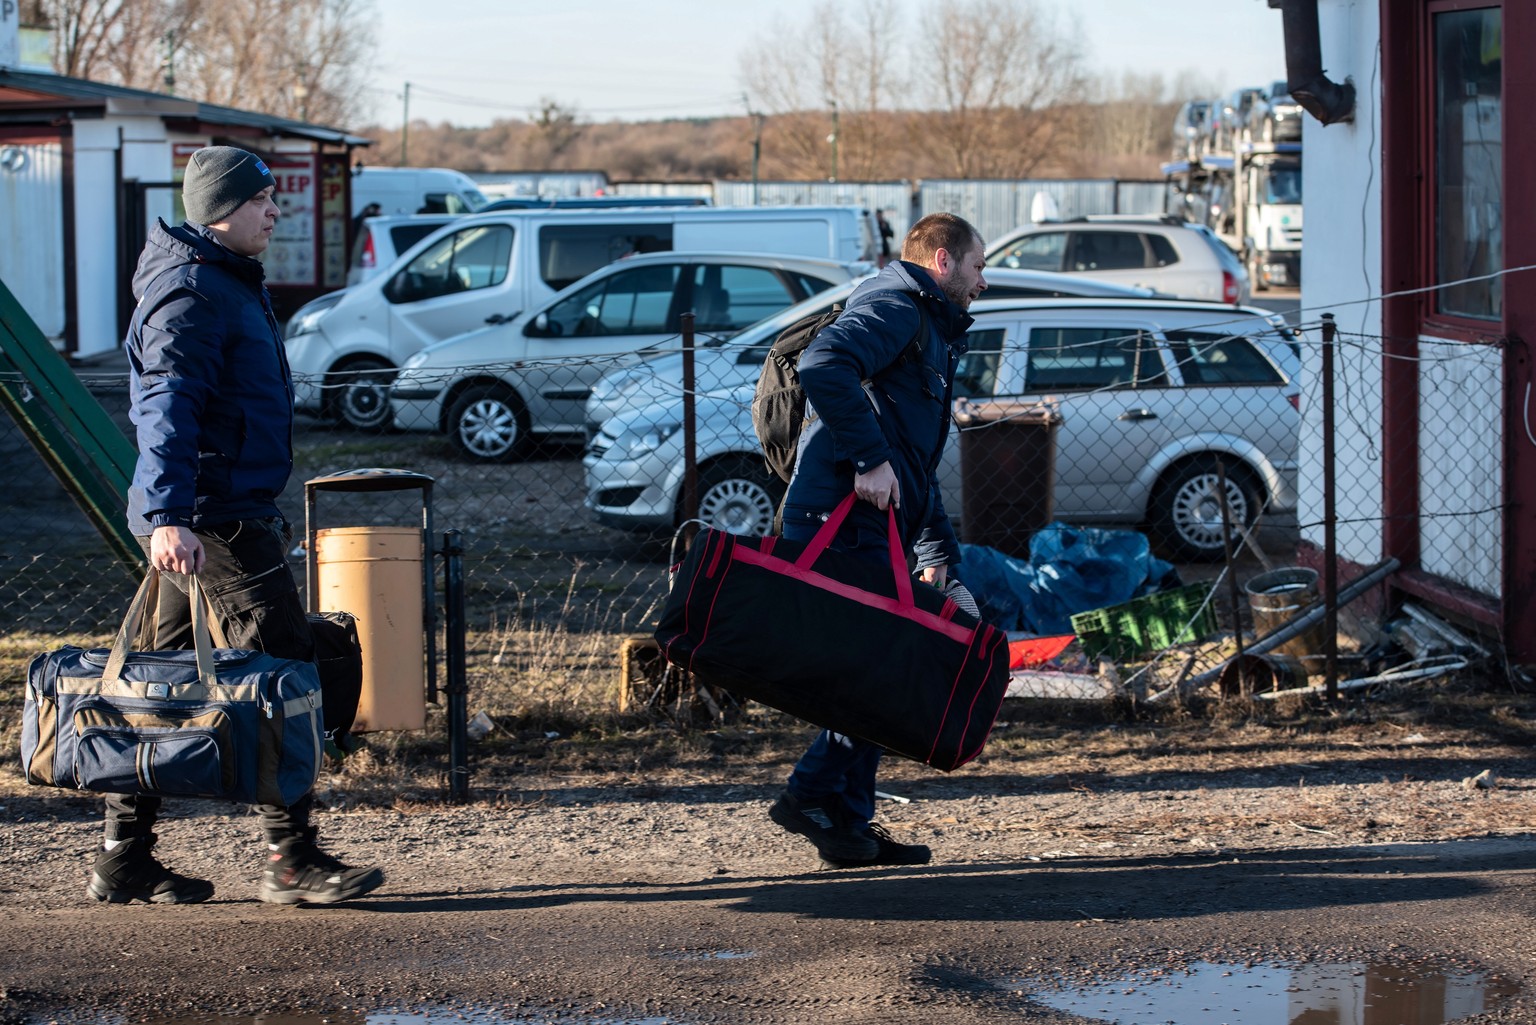 epa09781468 People walk near the Polish-Ukrainian border crossing in Dorohusk, Poland 24 February 2022. The Polish Ministry of Interior and Administration informed they have reception points for refug ...